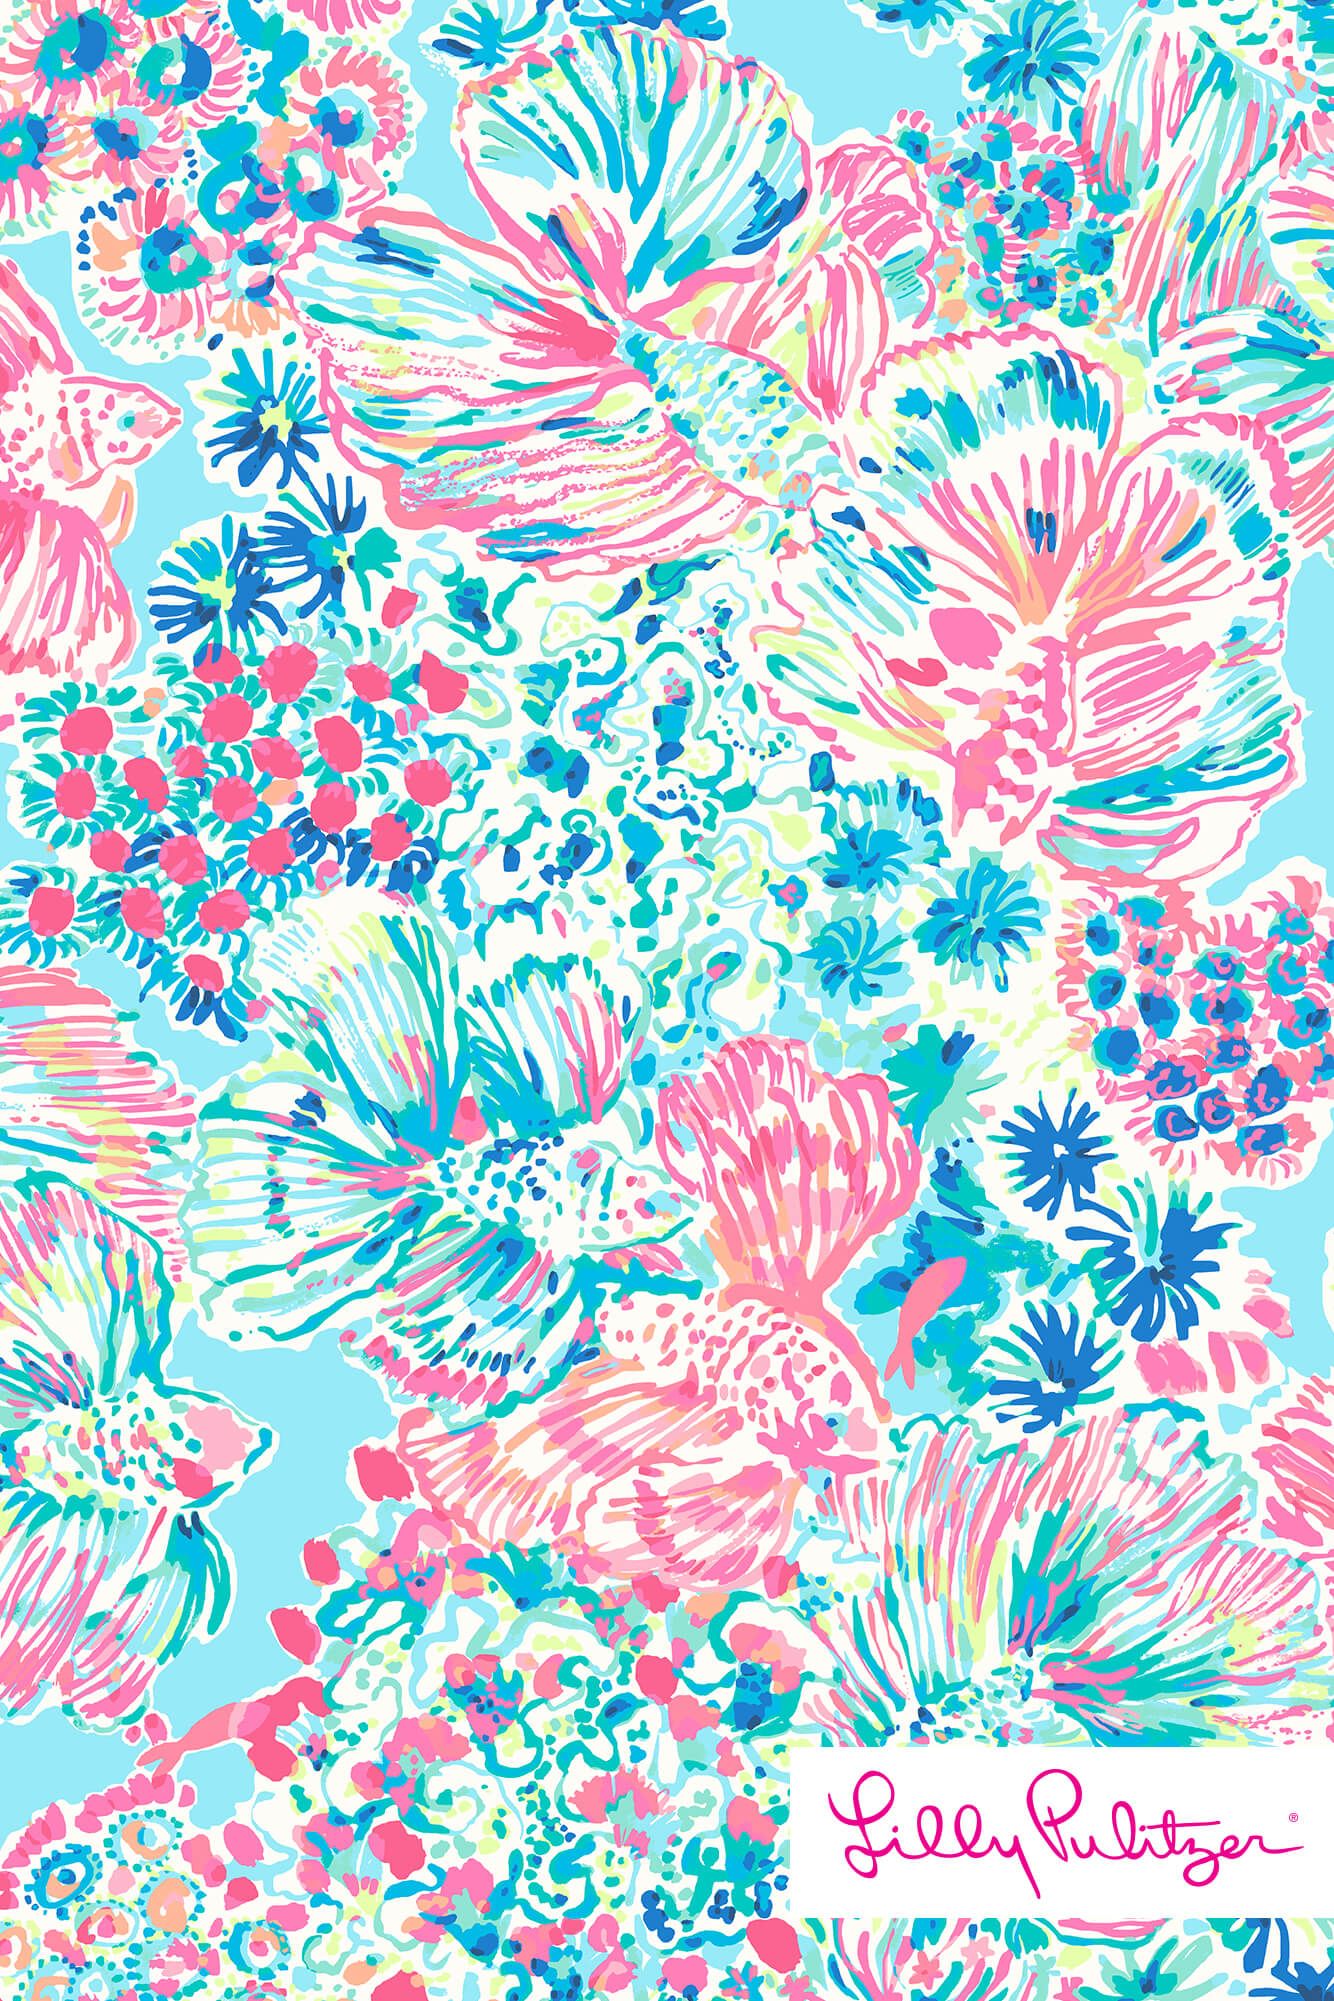 free-download-15-lilly-patterns-ideas-lilly-pulitzer-prints-lillies